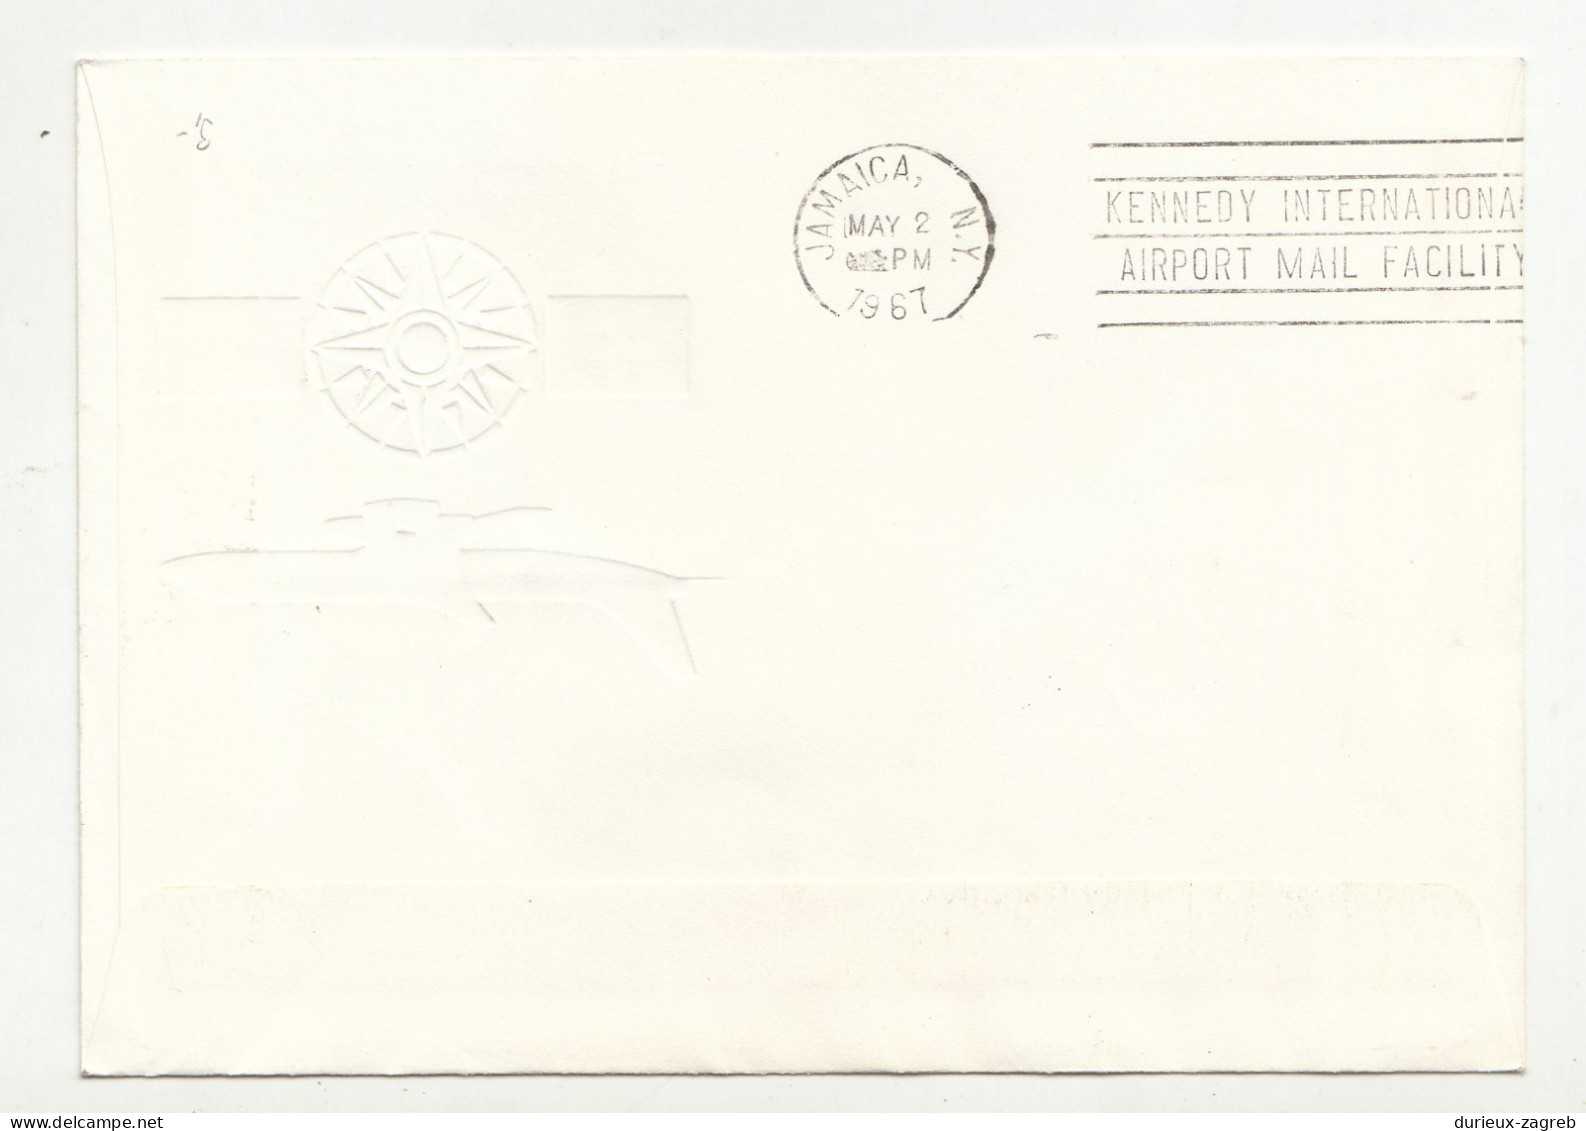 Switzerland 20 Jahre Swissair-Nordatlantikflüge 2. Mai 1967 Special Illustrated Letter Cover Posted Jamaica B240301 - Other (Air)